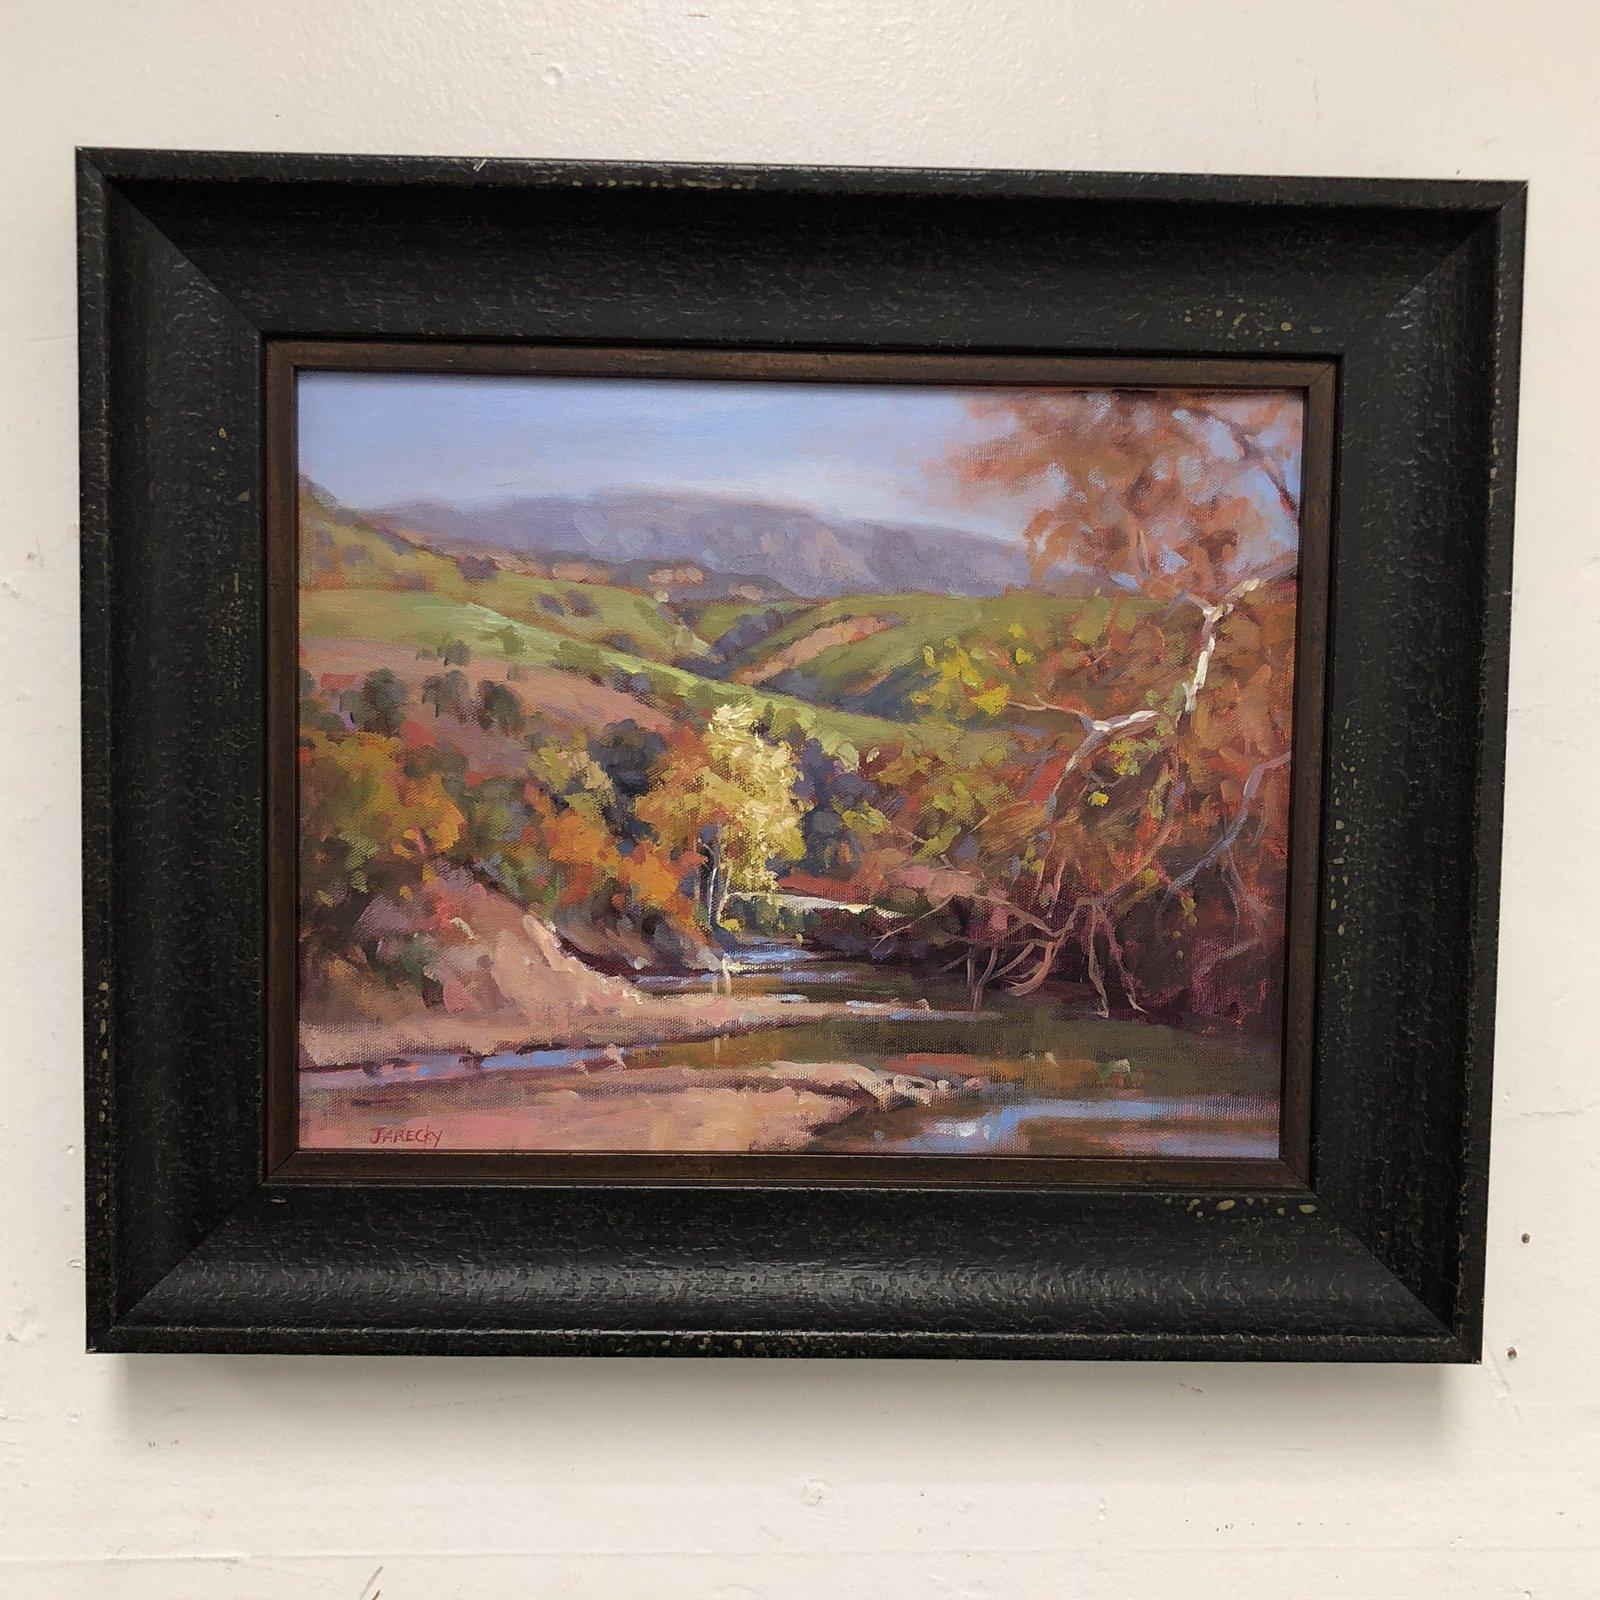 A original painting by Susan Jarecky. An oil on canvas scenery titled 